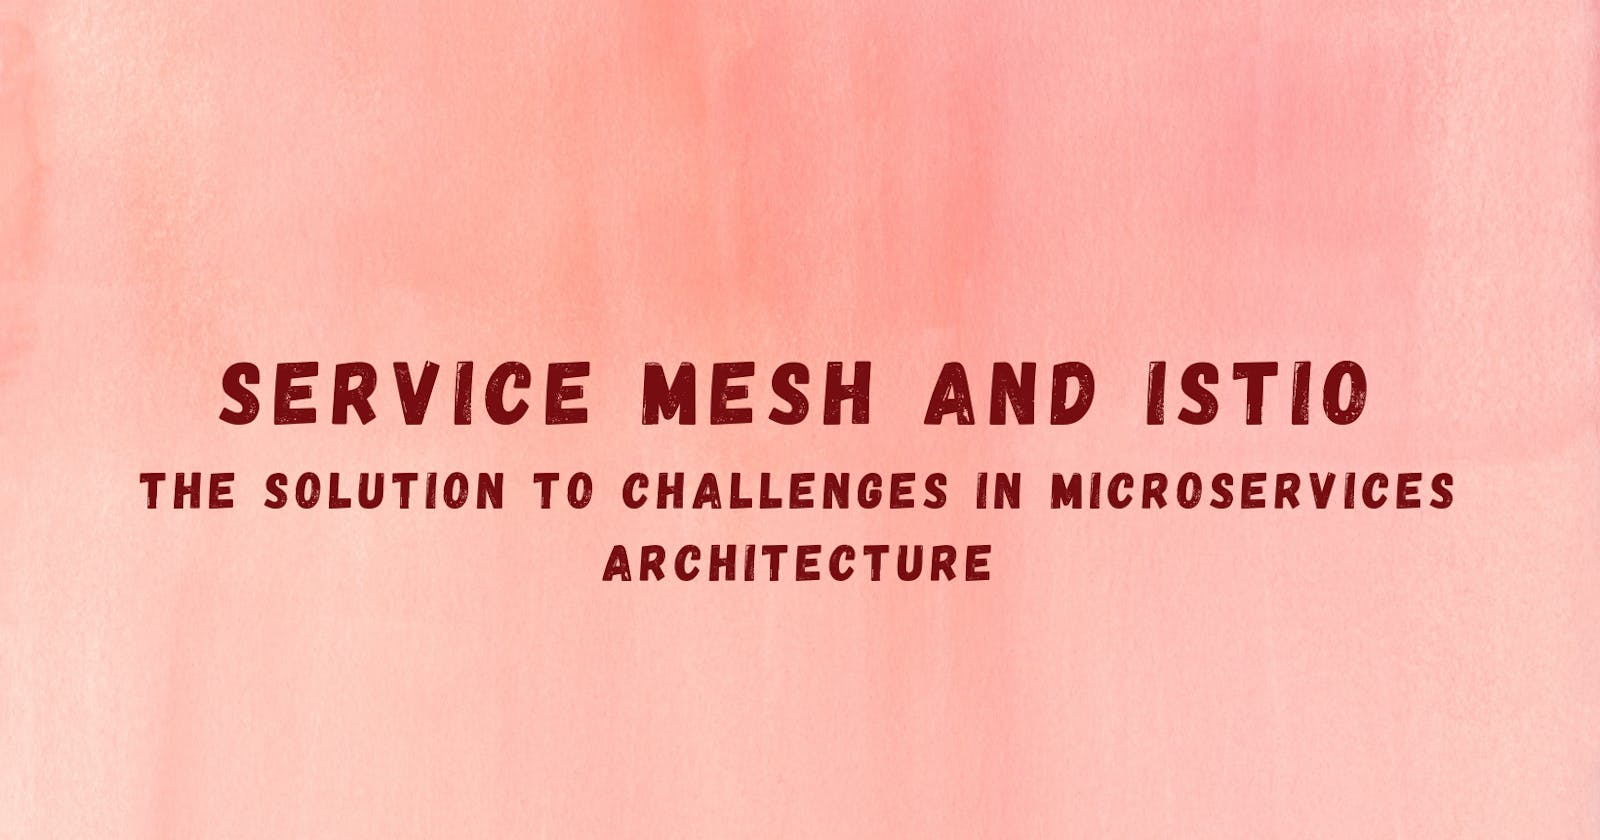 Service Mesh and Istio: The Solution to Challenges in Microservices Architecture